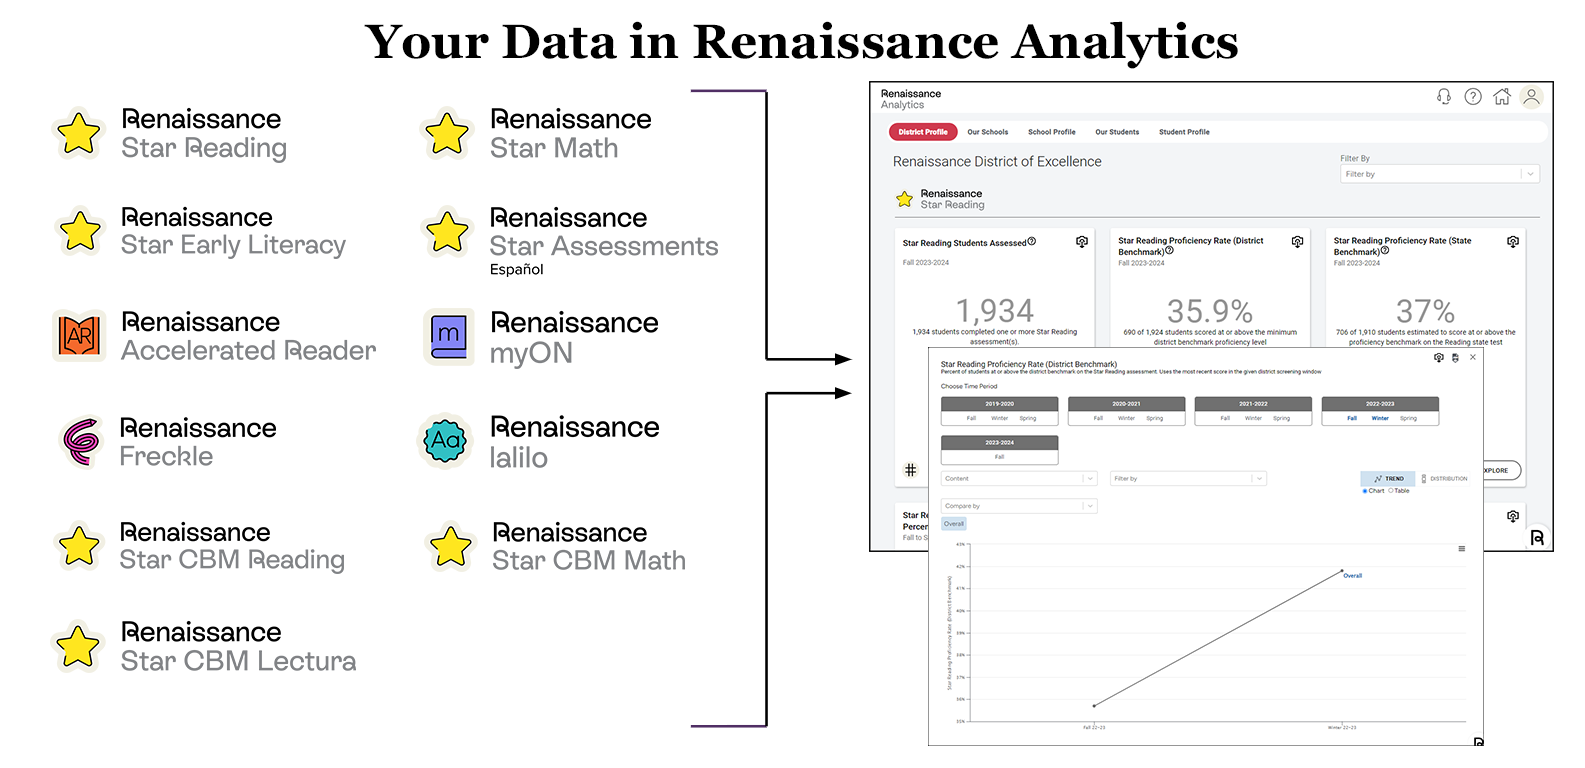 the products whose data is available in Renaissance Analytics